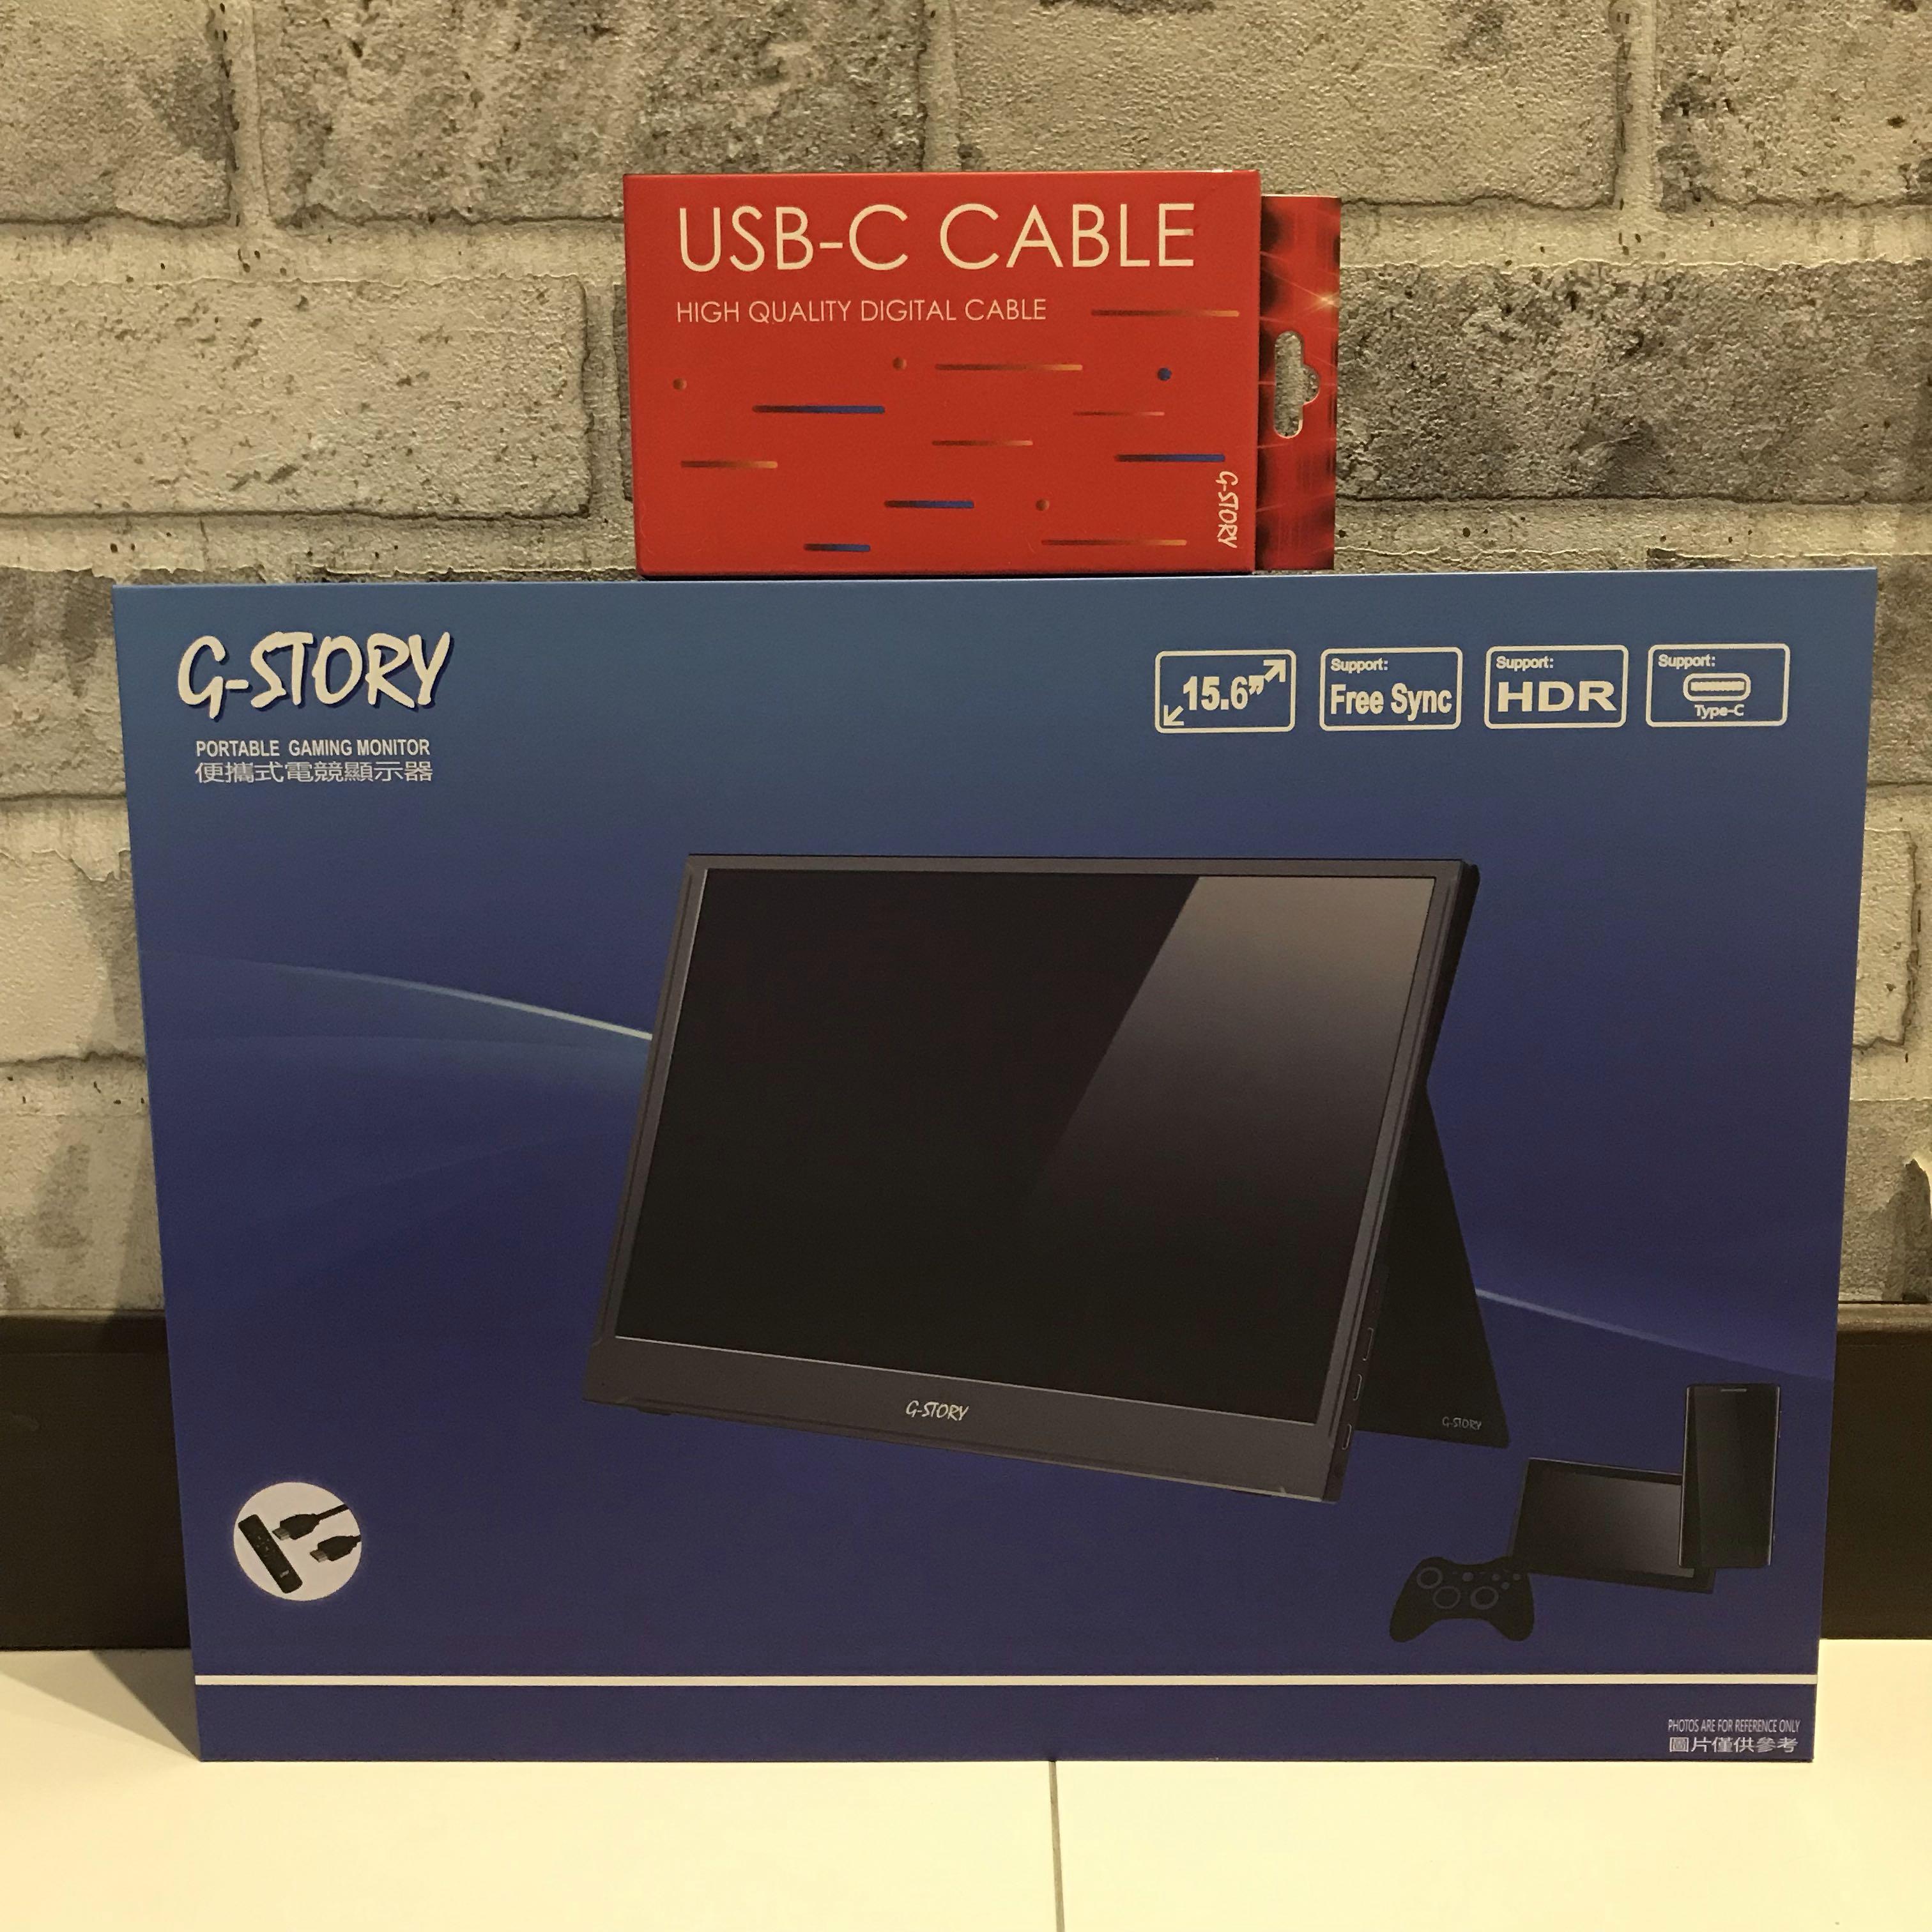 New G Story 15 6 Portable Gaming Monitor Model Gs156sm Toys Games Video Gaming Others On Carousell